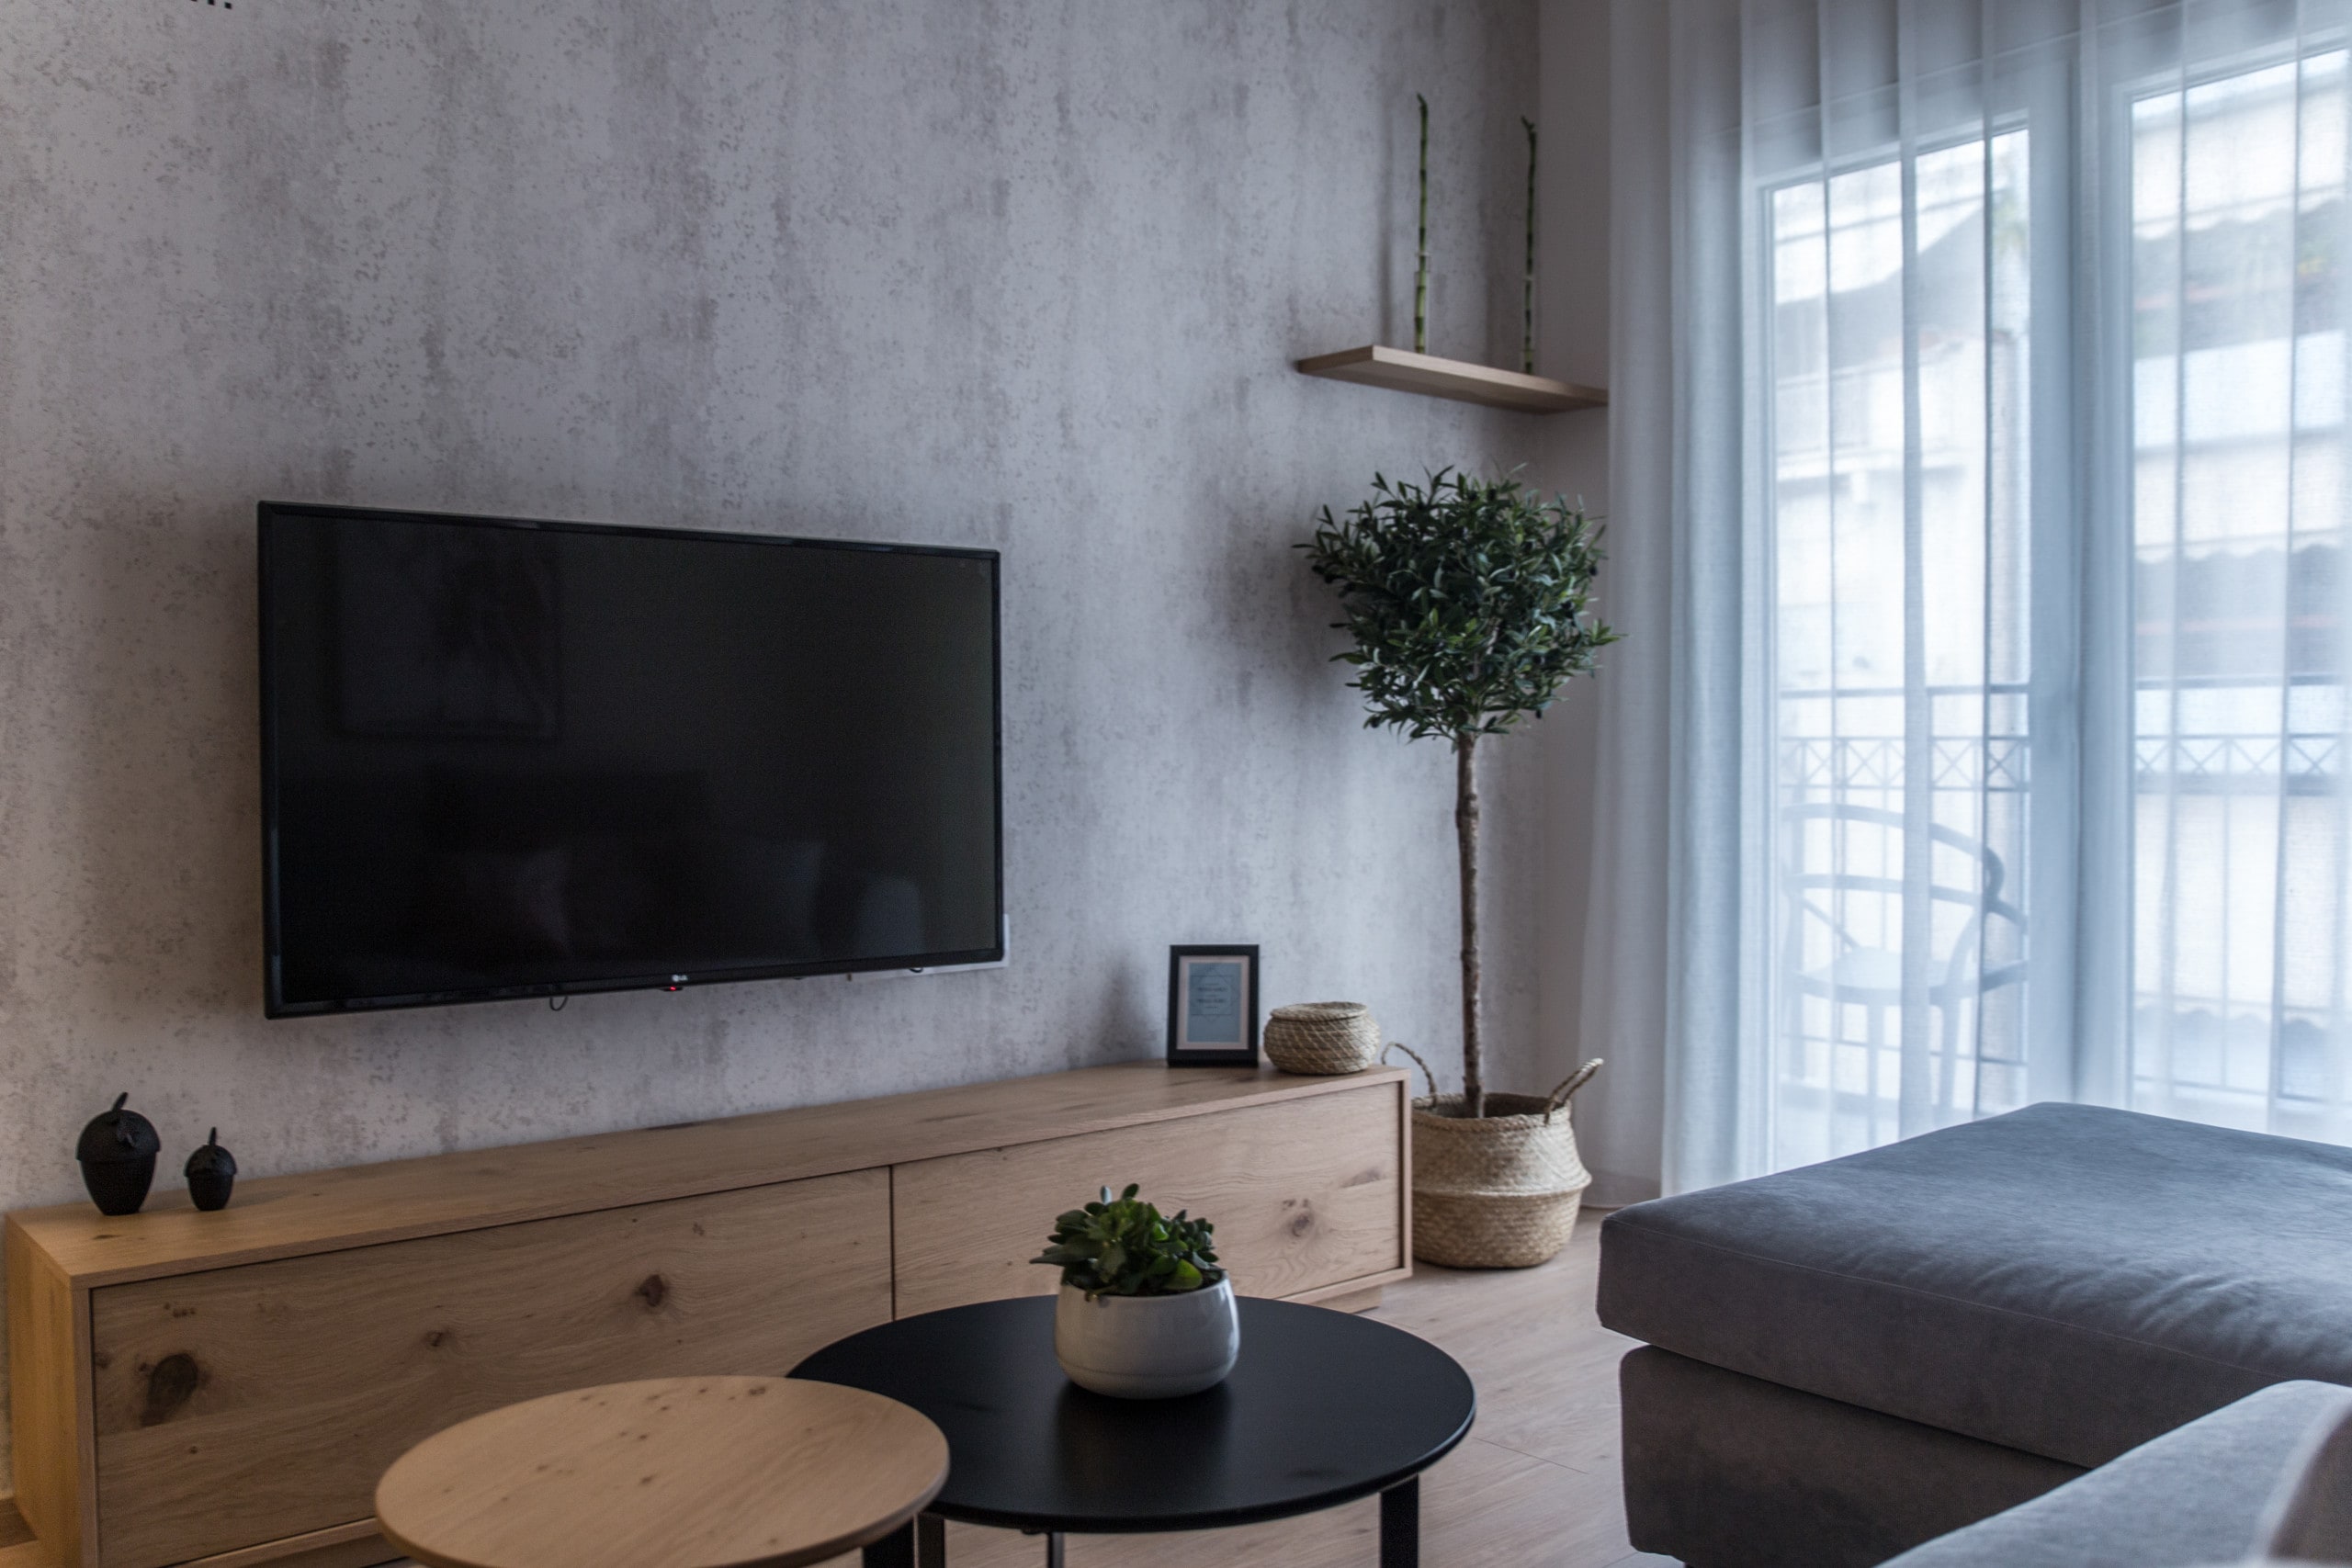 The living room has a comfortable sofa bed with a big flat smart TV and a dining table bar. From the big window door you have access to the balcony of the apartment where you can look down to the road. 

